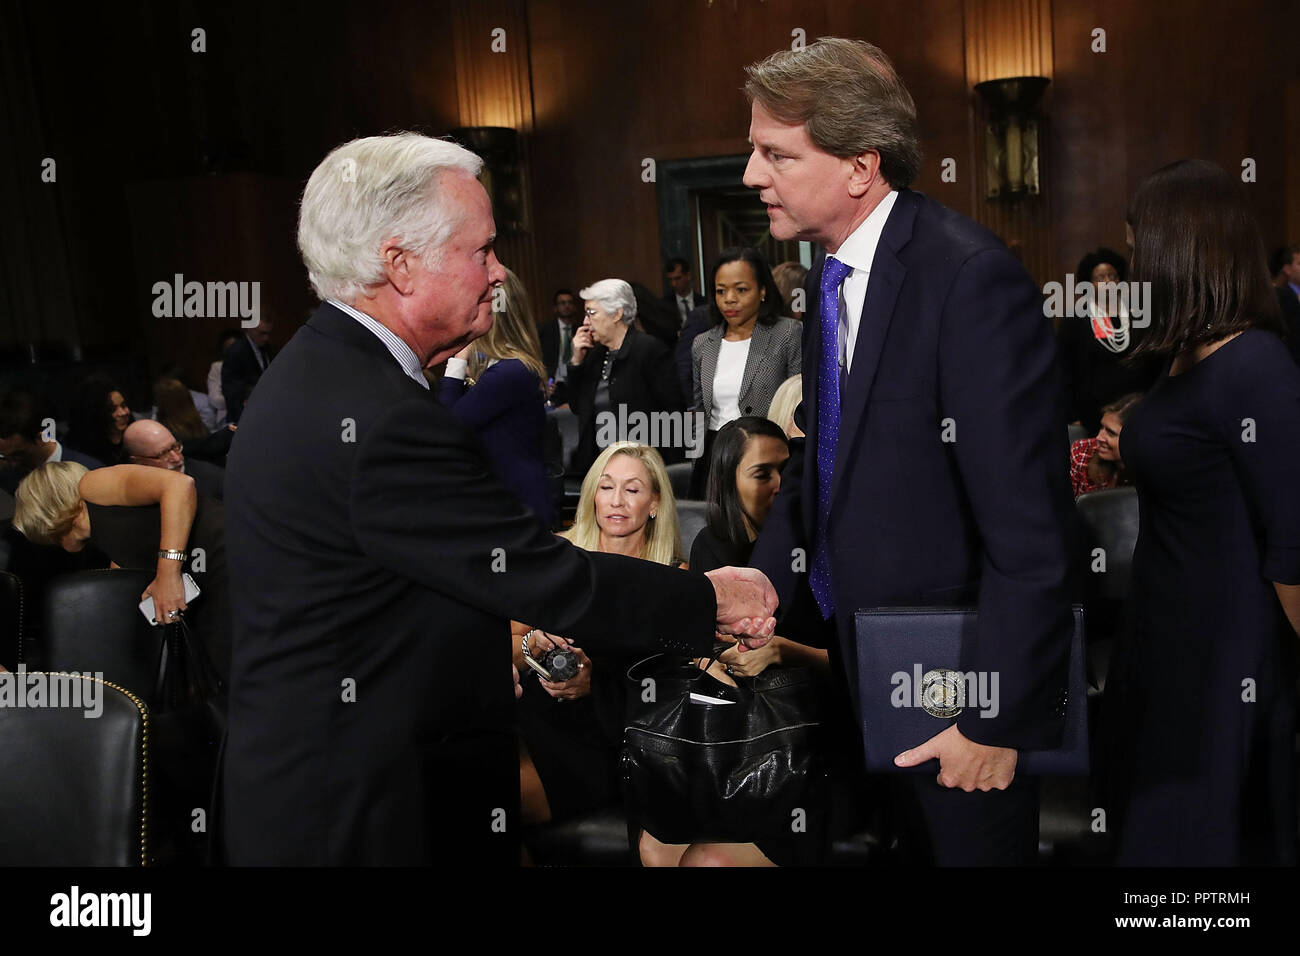 Washington, DC, USA. 27th Sep, 2018. Judge Brett Kavanaugh's father Everett Kavanaugh (L) shakes hands with White House Counsel Don McGahn at the conclusion of Supreme Court nominee Judge Brett Kavanaugh's confirmation hearing before the Senate Judiciary Committee in the Dirksen Senate Office Building on Capitol Hill September 27, 2018 in Washington, DC.  Credit: Stock Photo